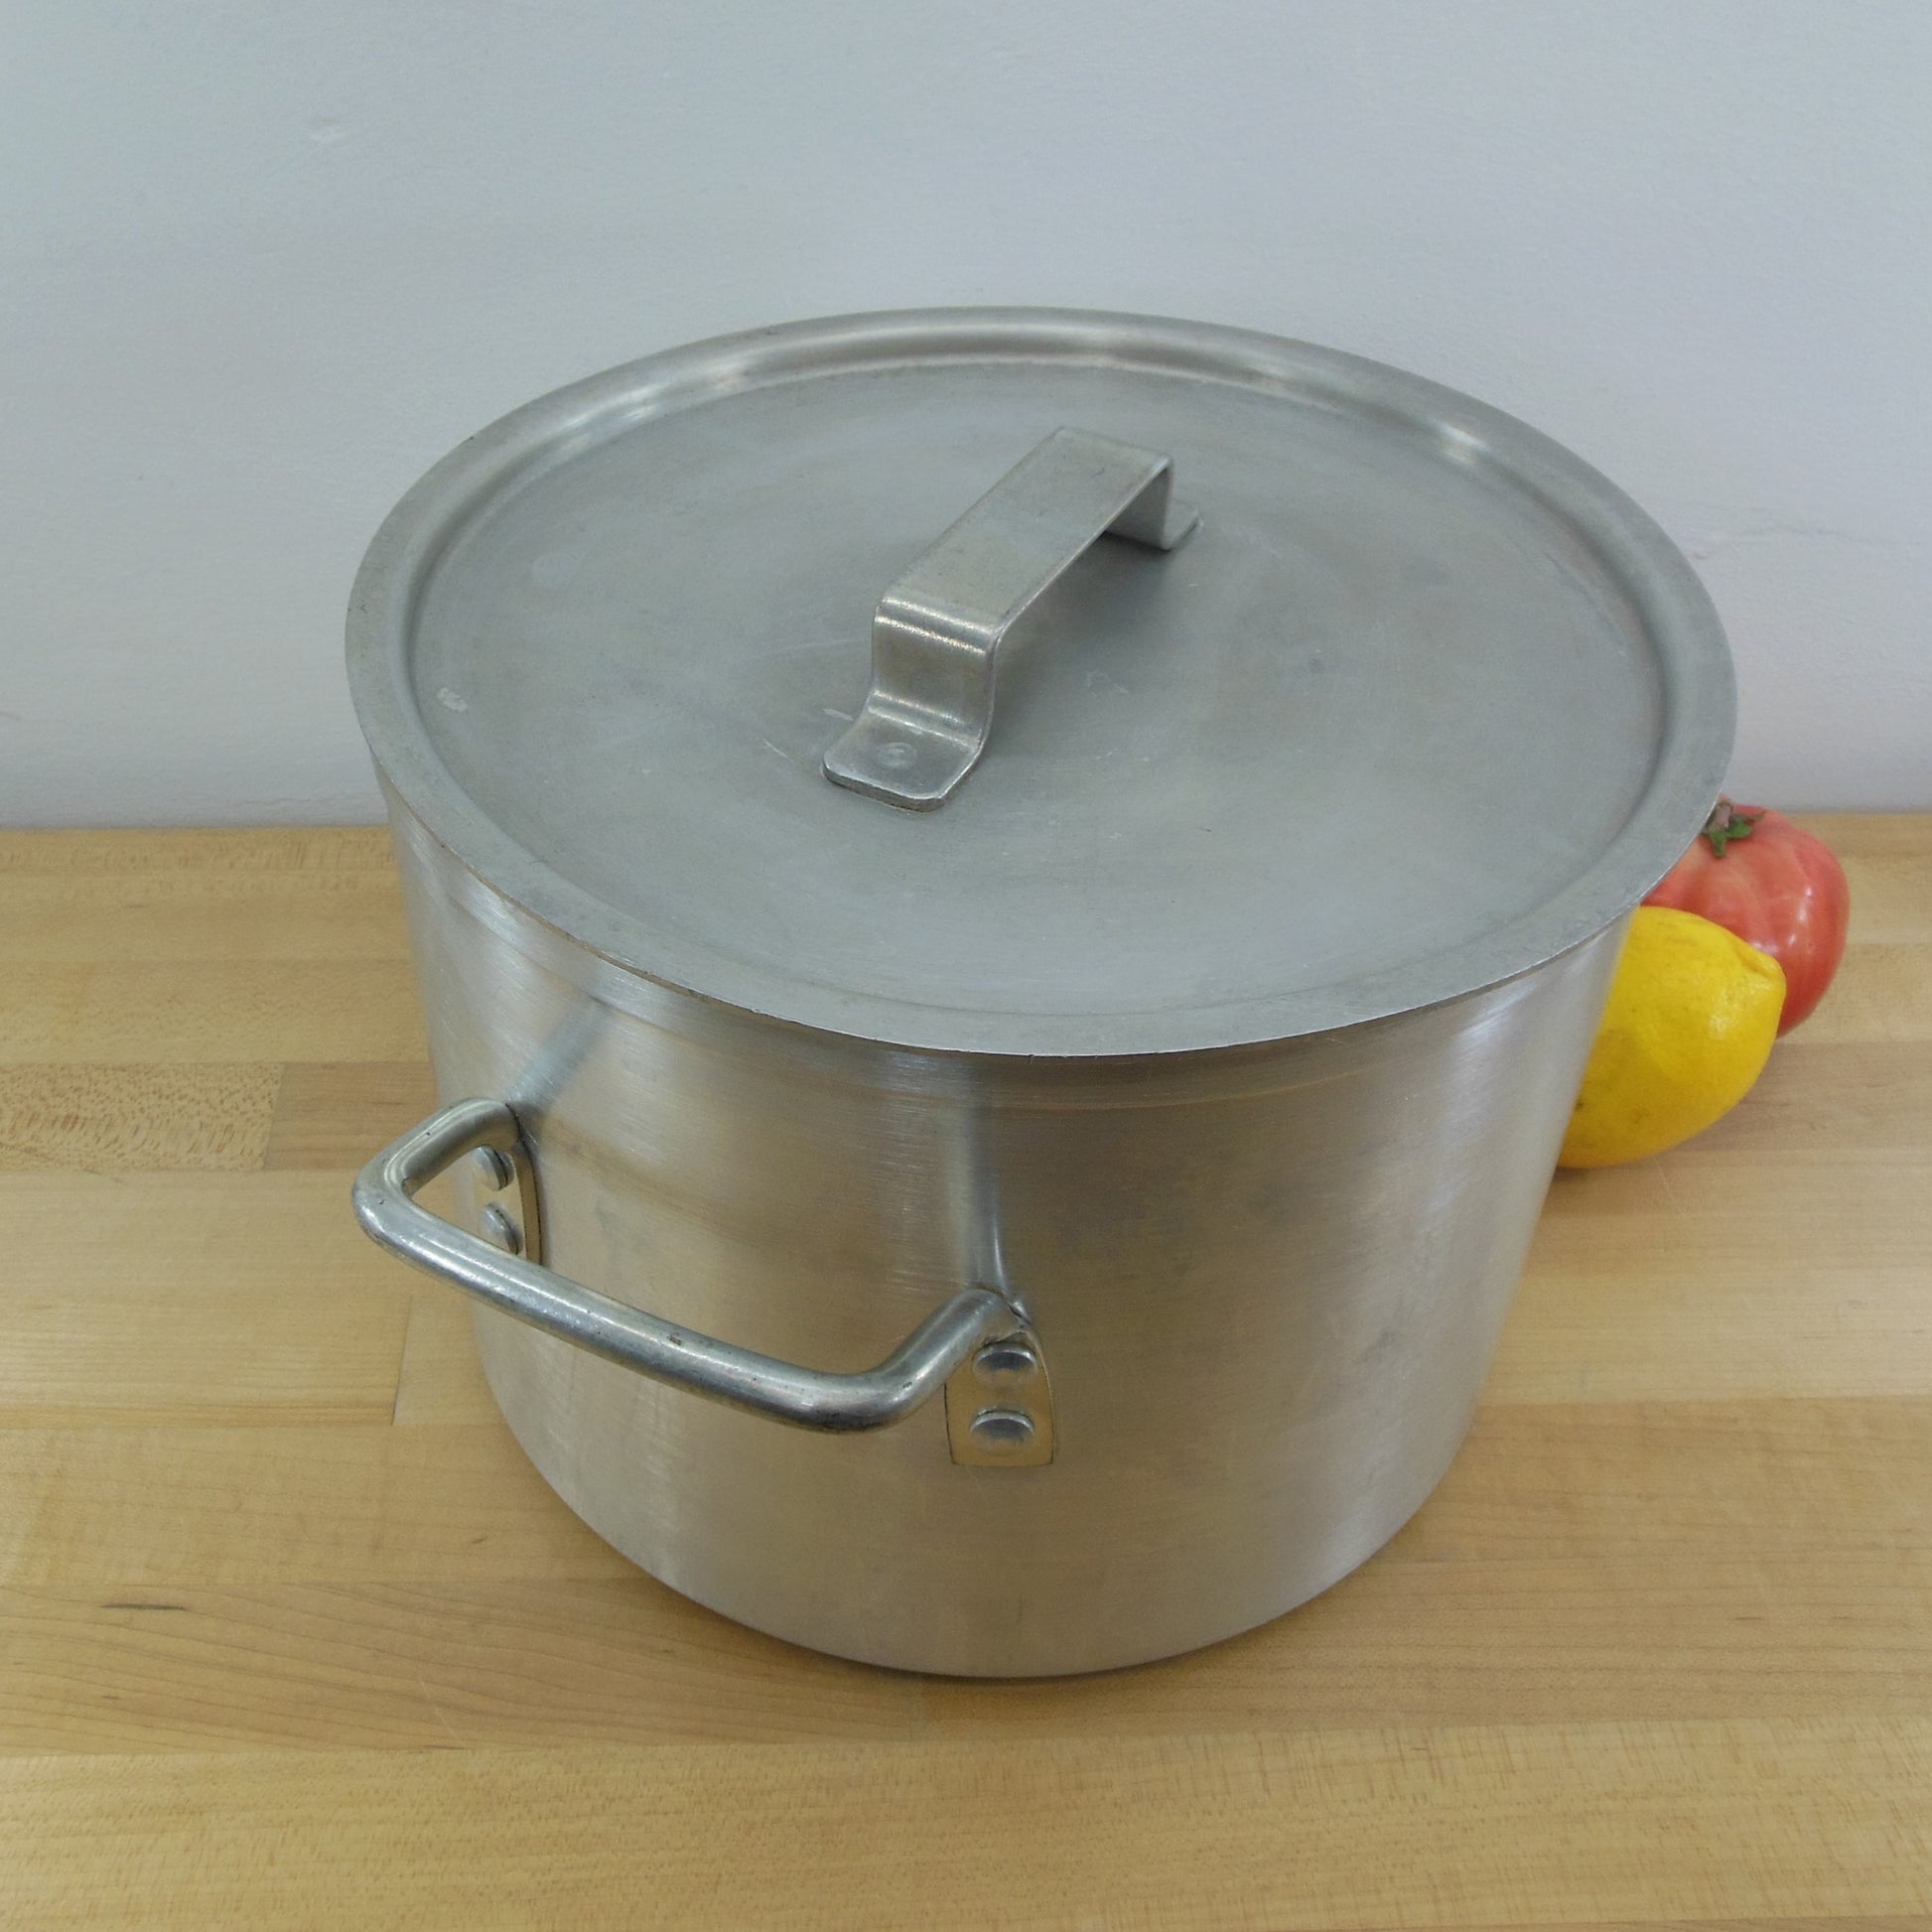 Vintage Leyse Aluminum Co. Stock Pot with top Venting - Original !!